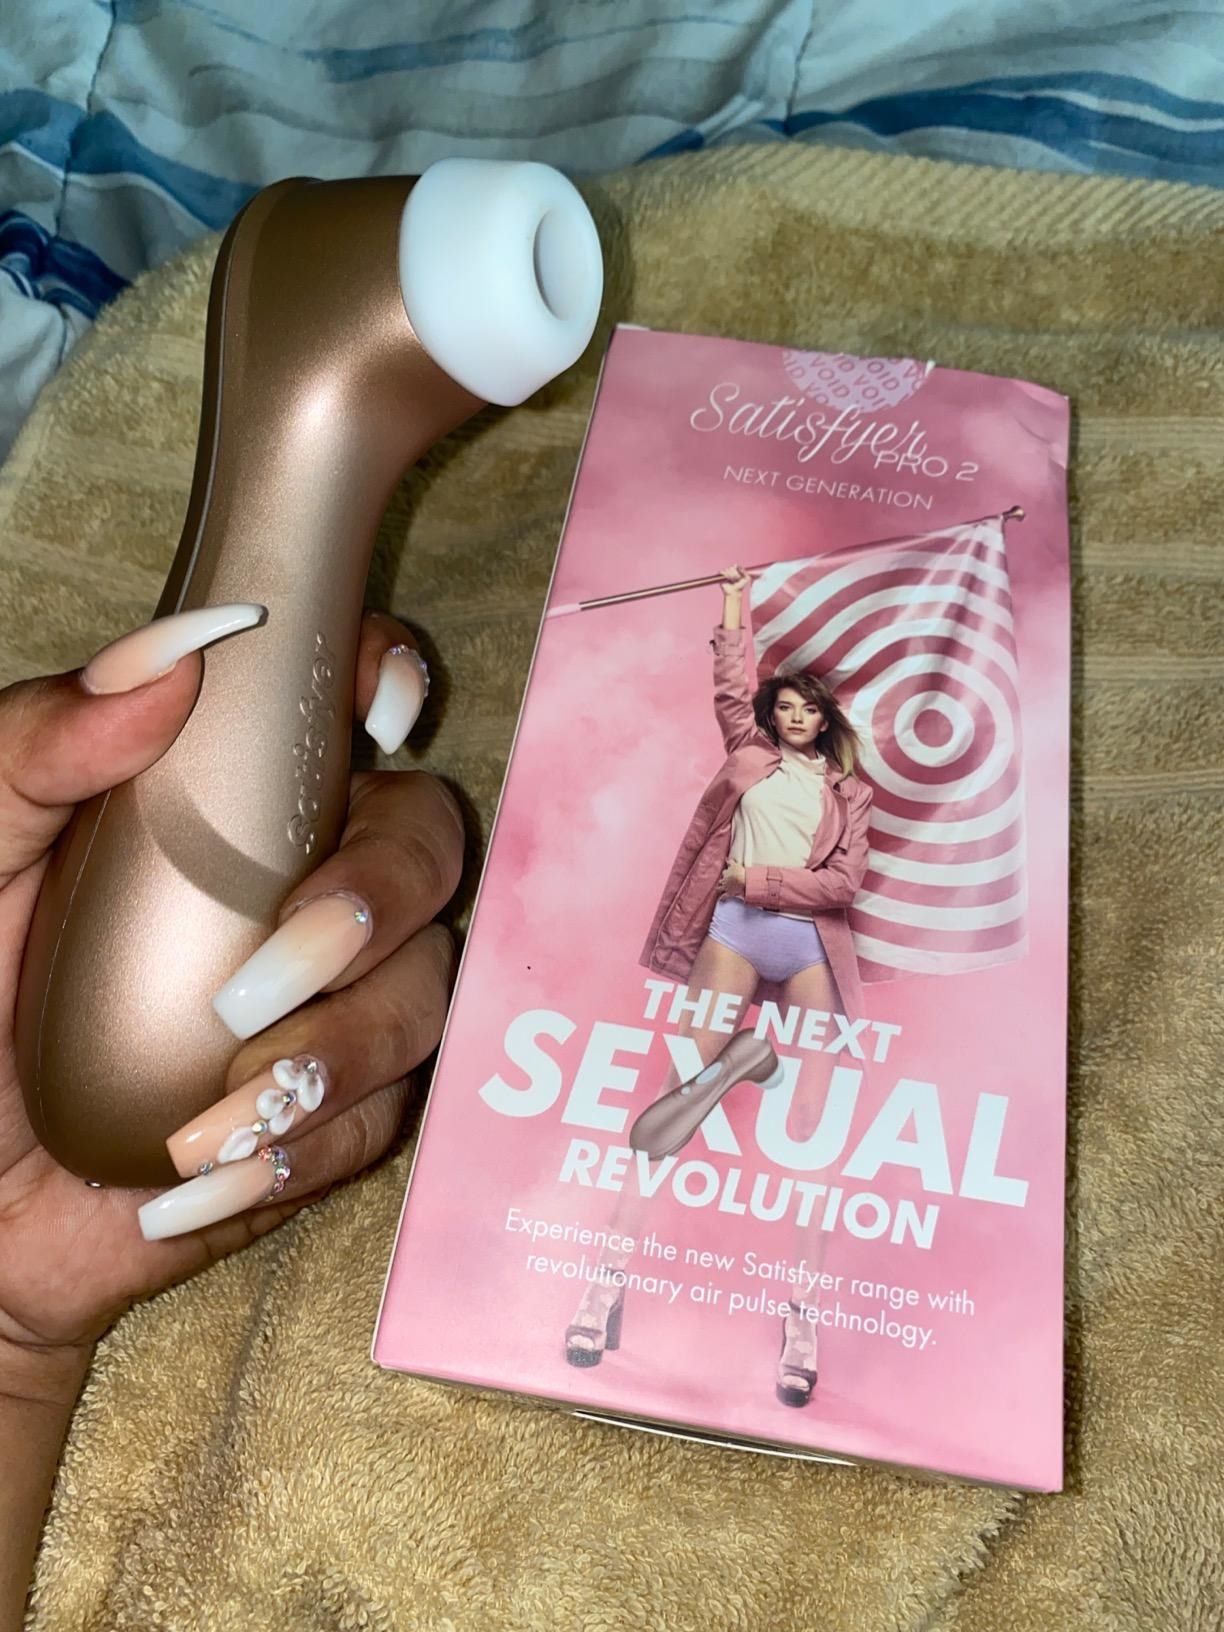 Model holding champagne-colored suction vibrator next to box